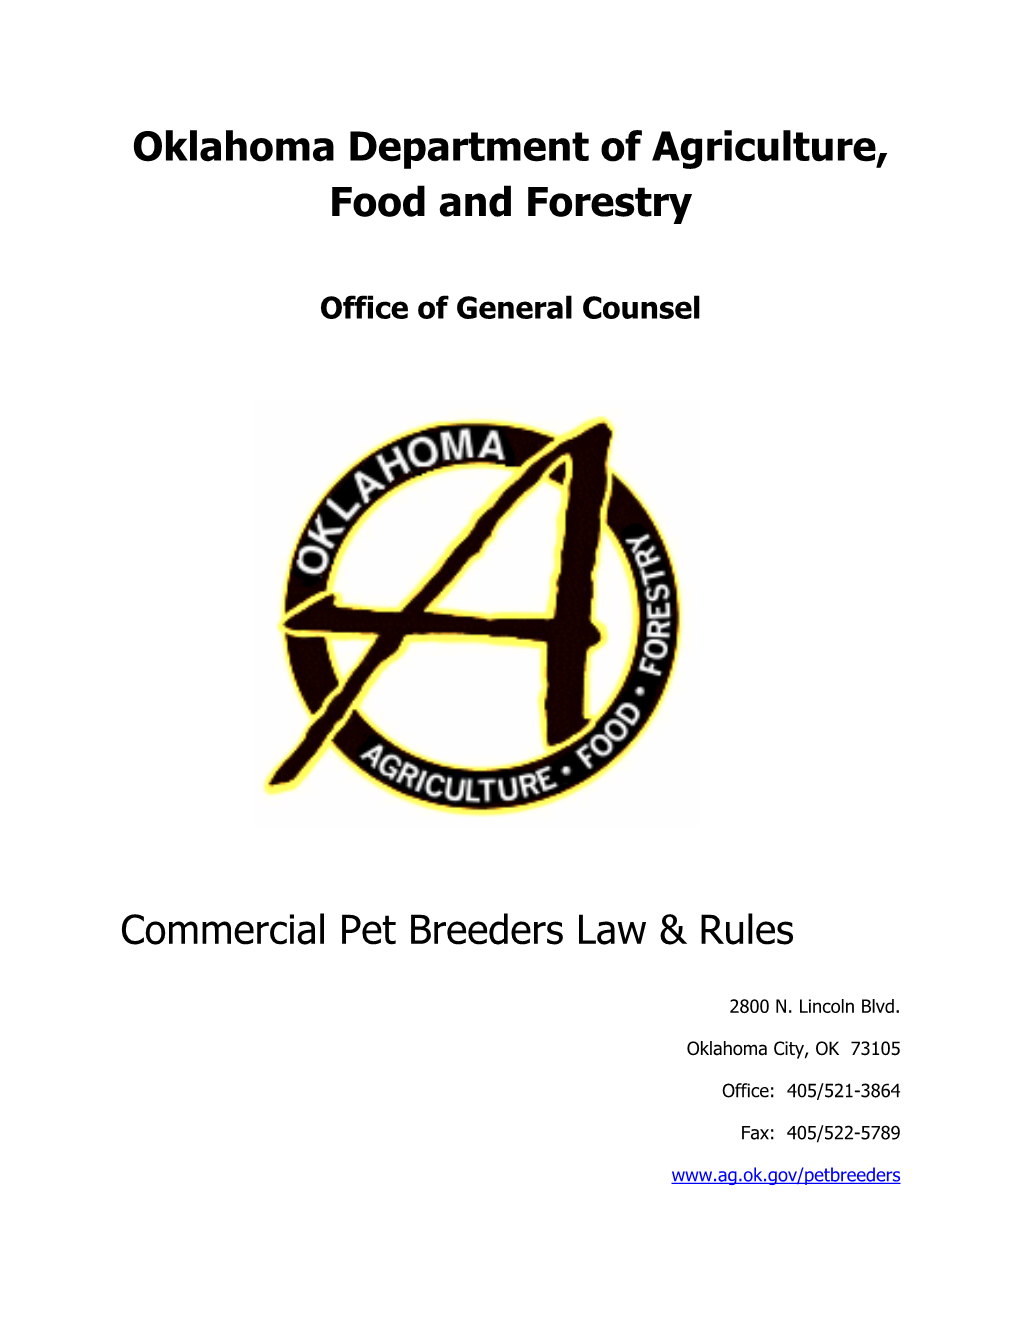 Oklahoma Department of Agriculture, Food and Forestry Commercial Pet